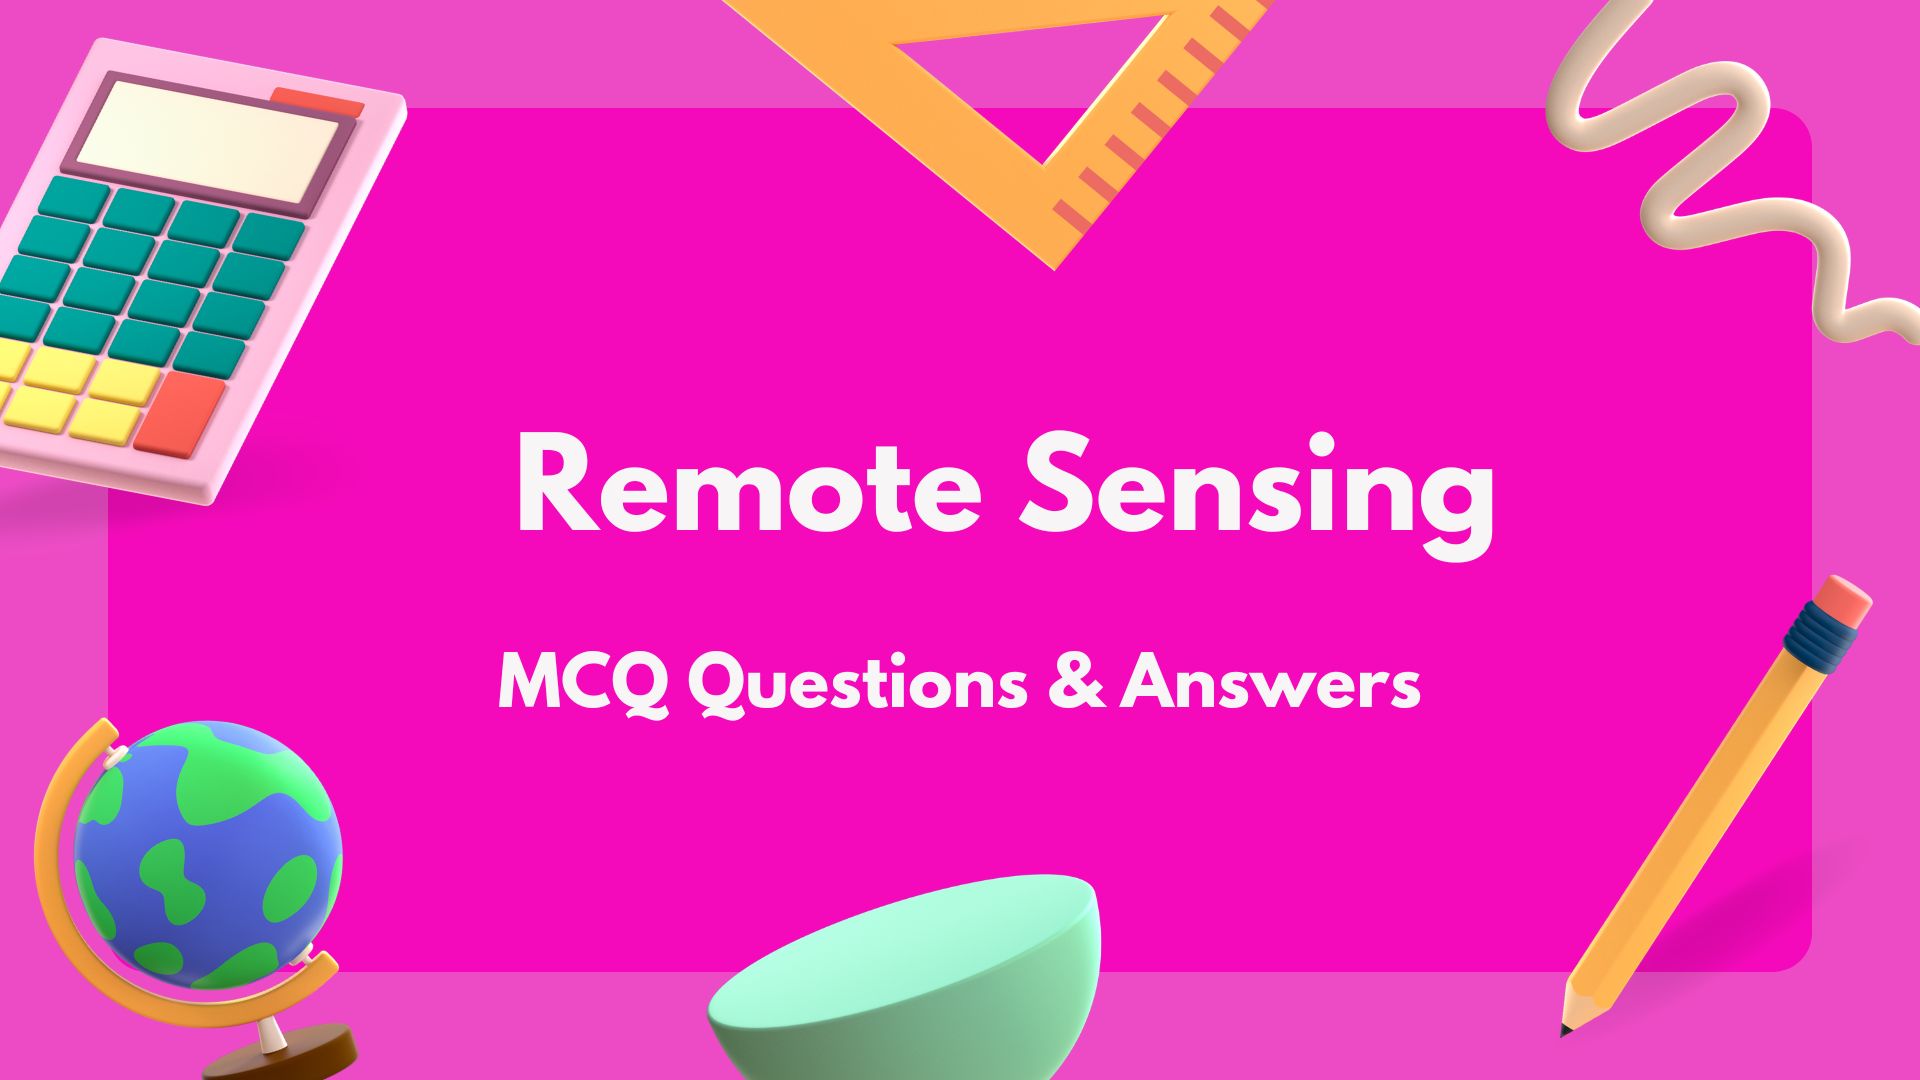 Remote Sensing MCQ Questions & Answers